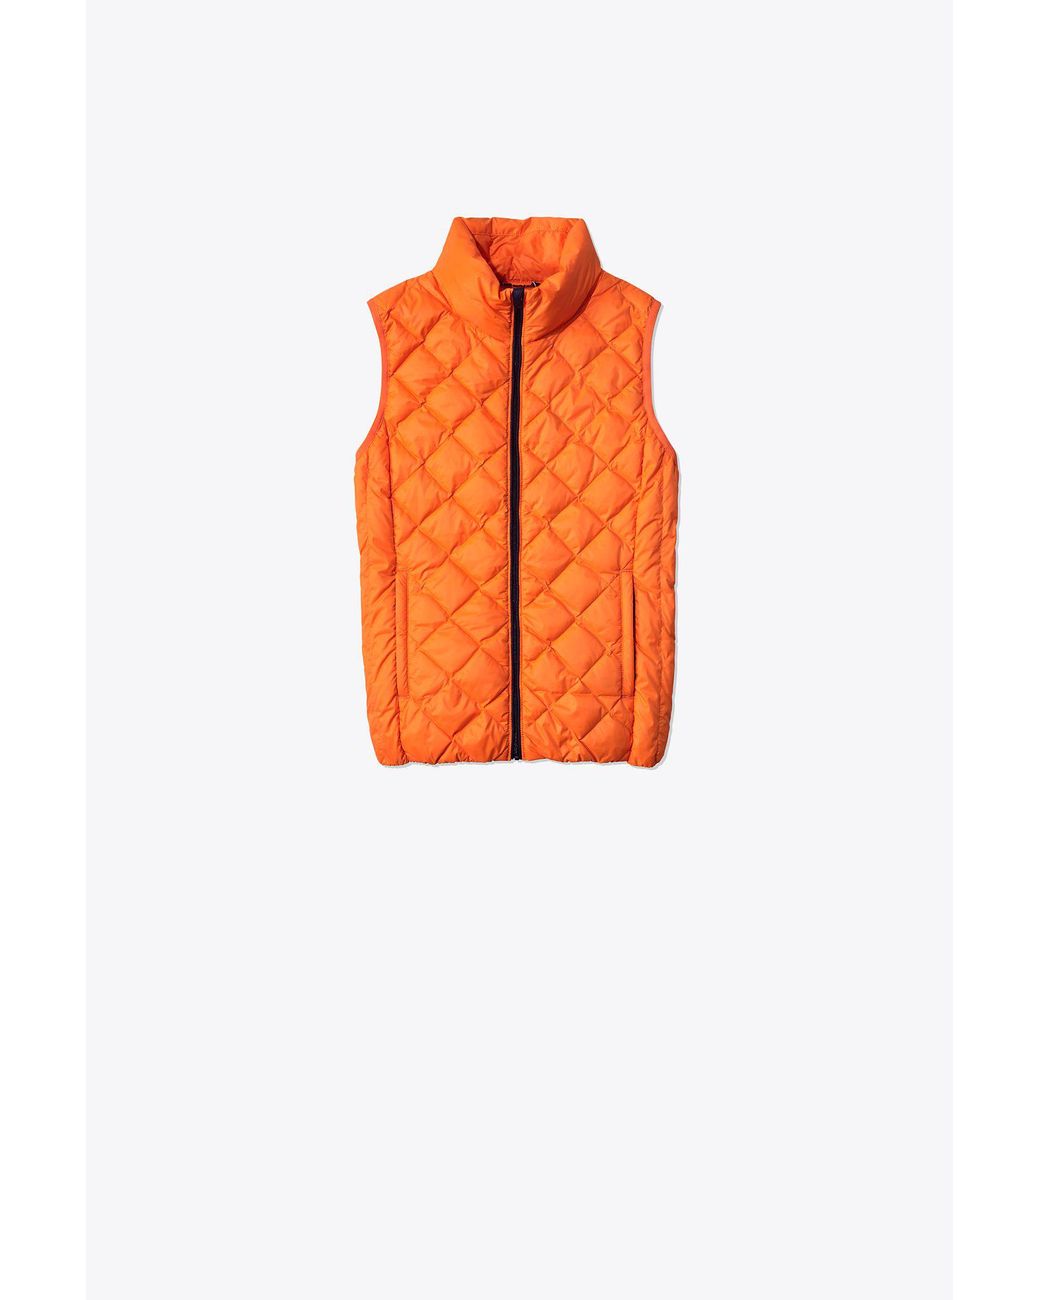 Tory Sport Synthetic Tory Burch Packable Down Vest in Orange | Lyst